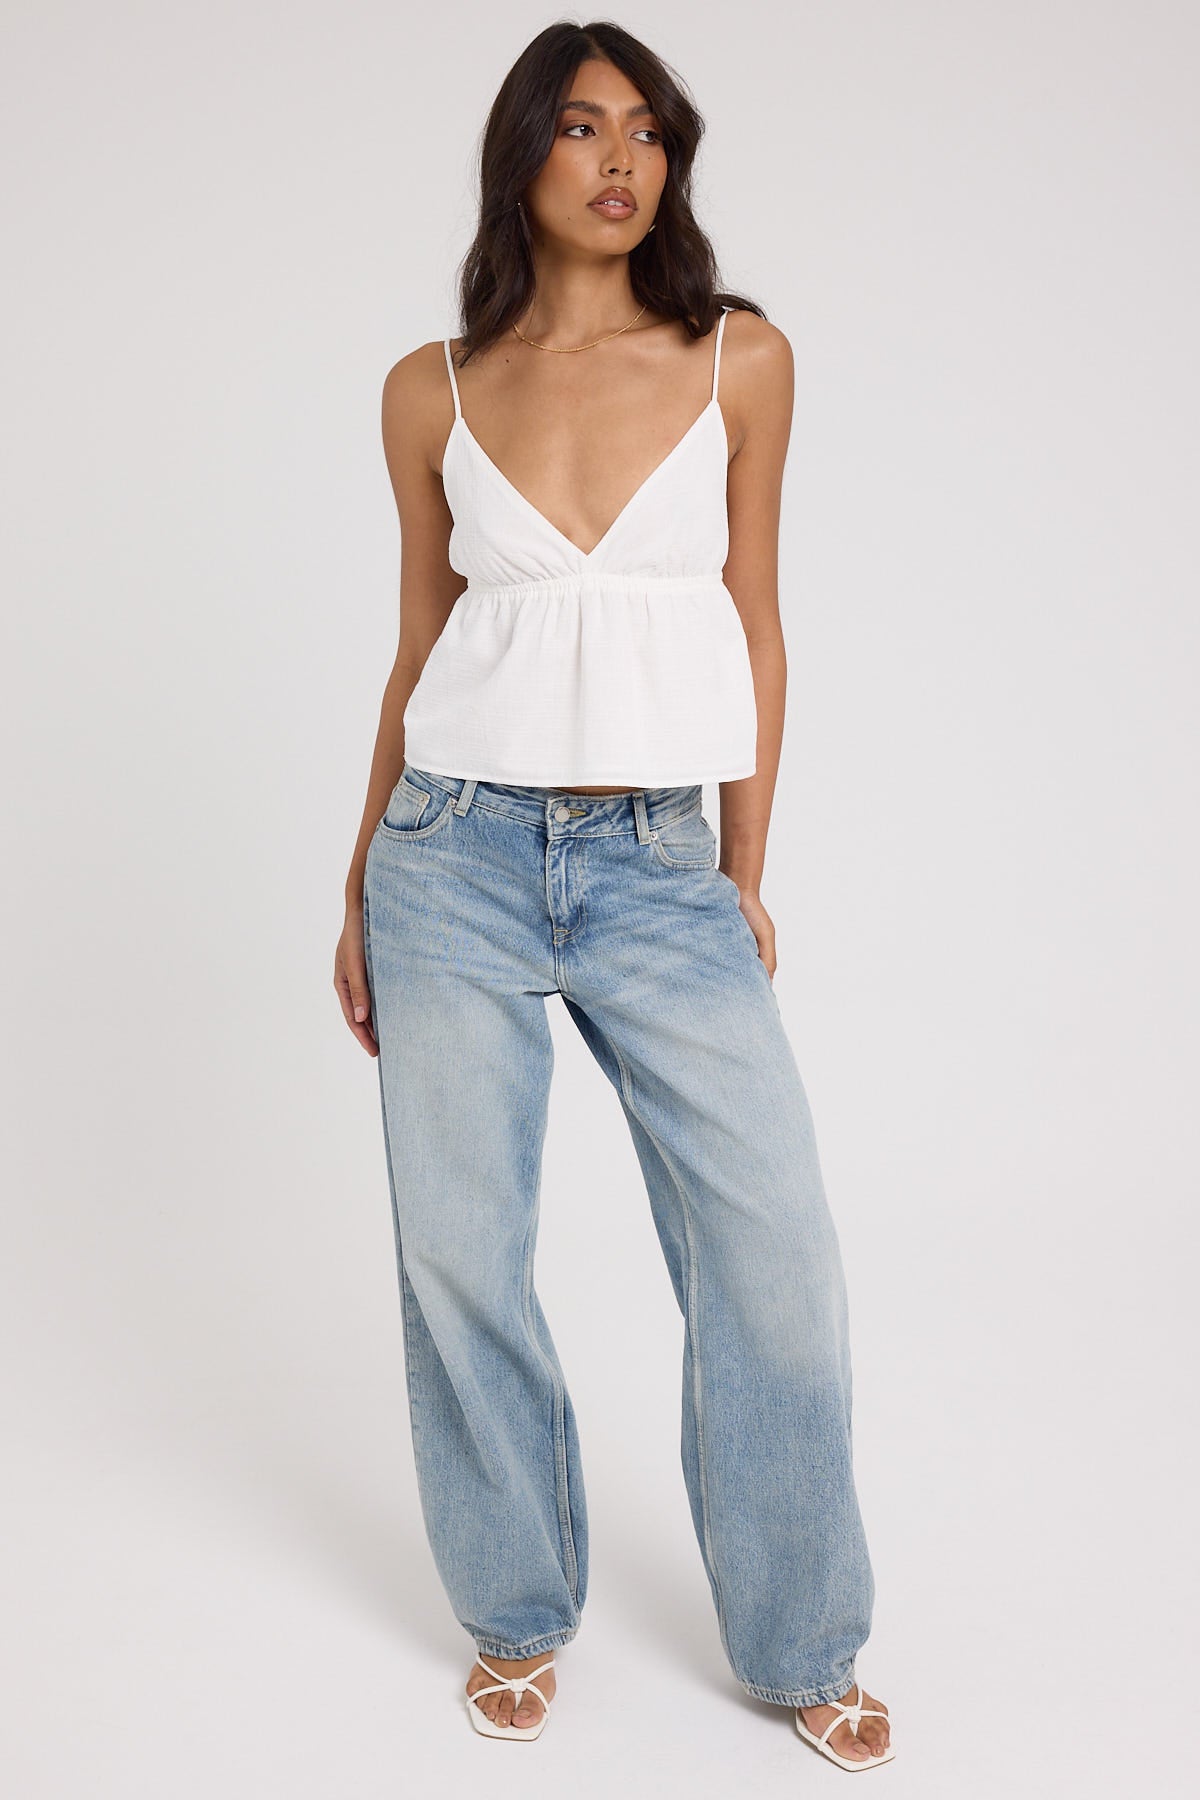 Luck & Trouble Marloes Top White